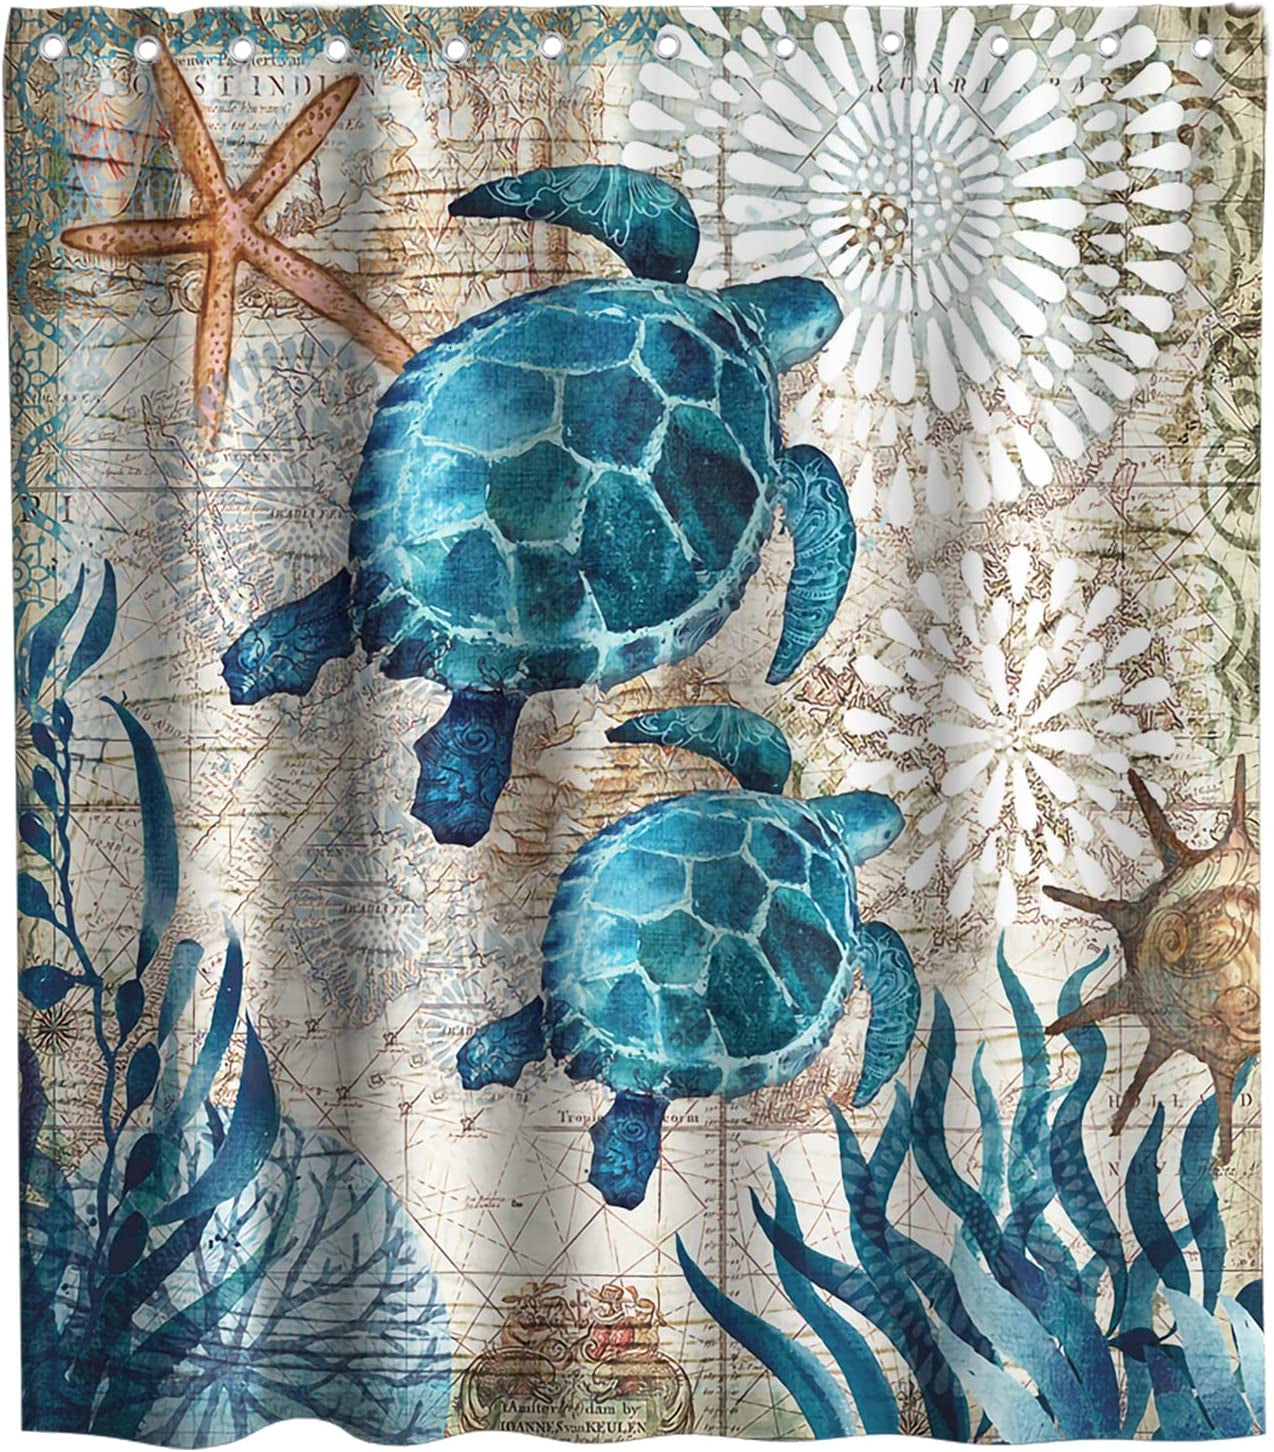 Nautical Green Sea Turtles Beach Theme Fabric Shower Curtain Sets Bathroom Blue Ocean Decor with Grommets and Hooks - 72 X 72 Inch Teal